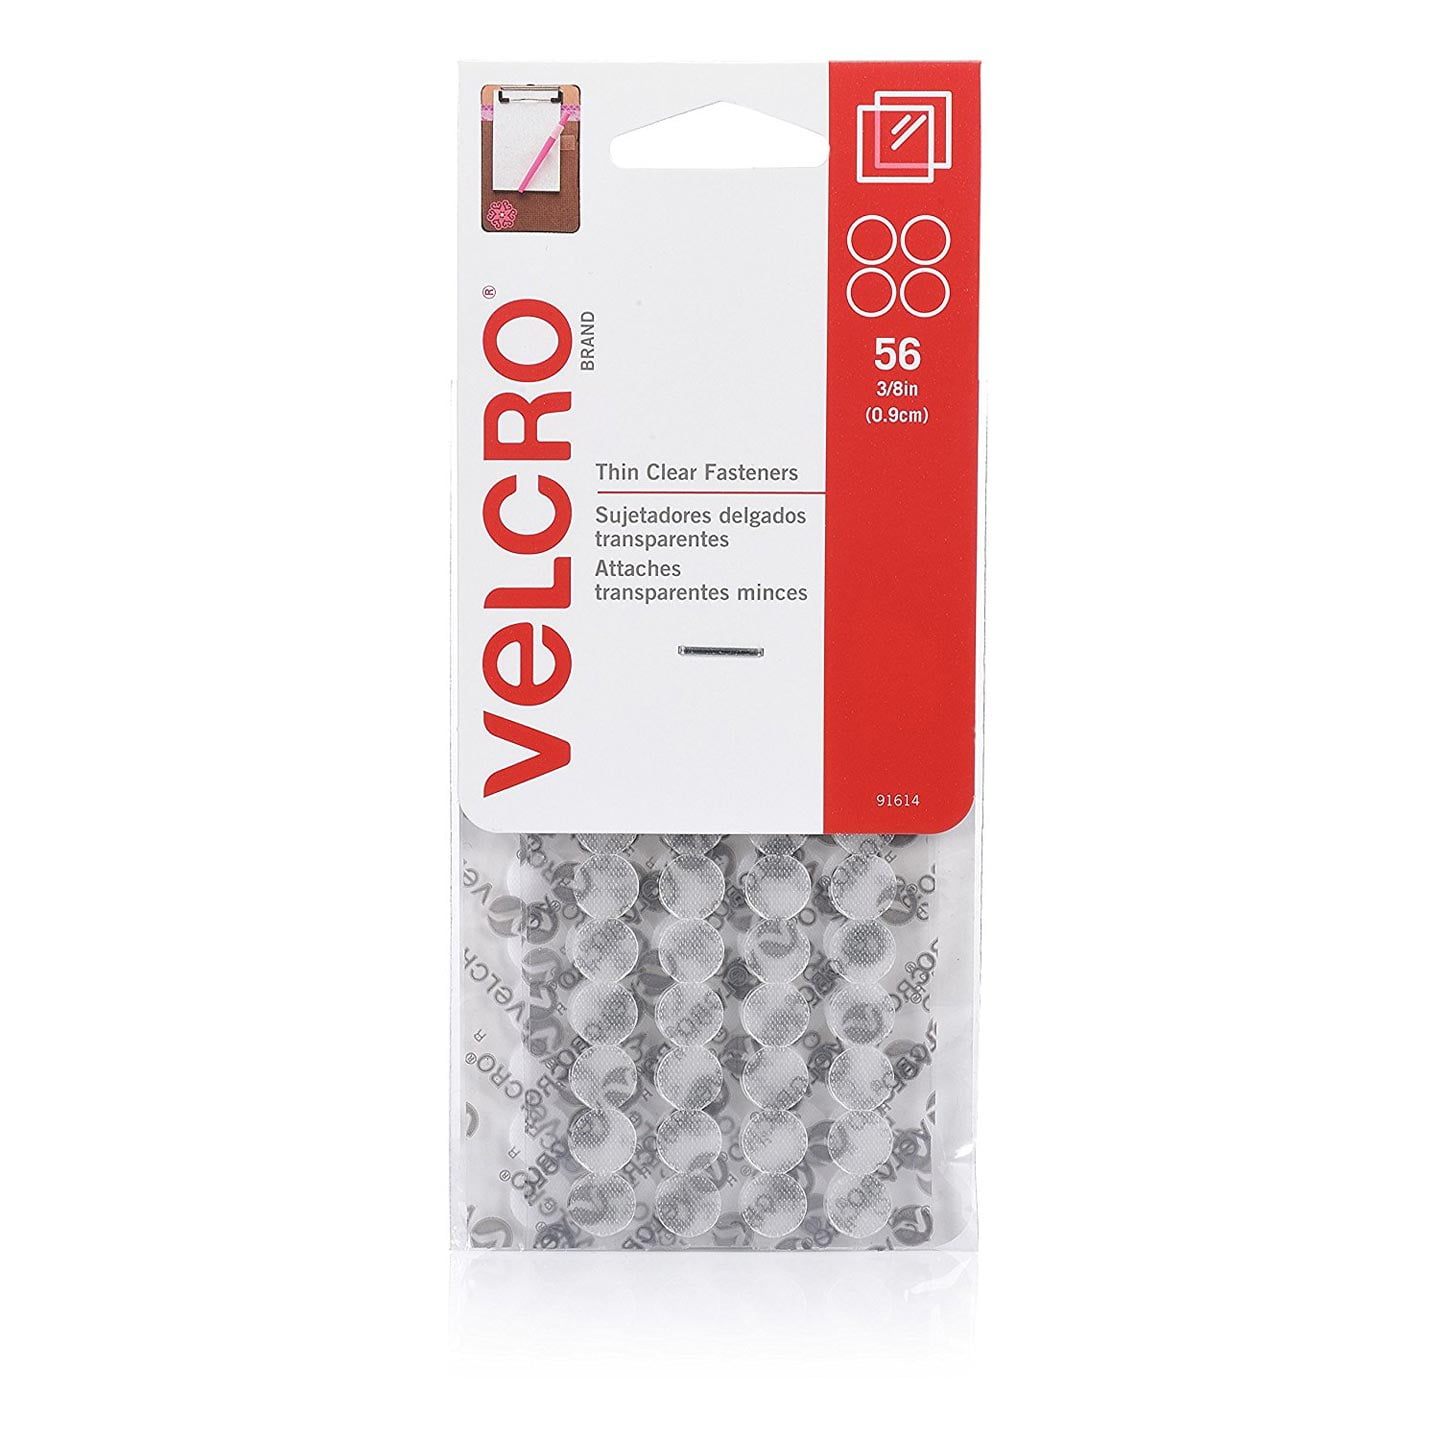 VELCRO Brand - Thin Clear | Purpose/ Low Profile | Perfect for Home, Classroom or Office, 3/8in Circles Clear 56 -